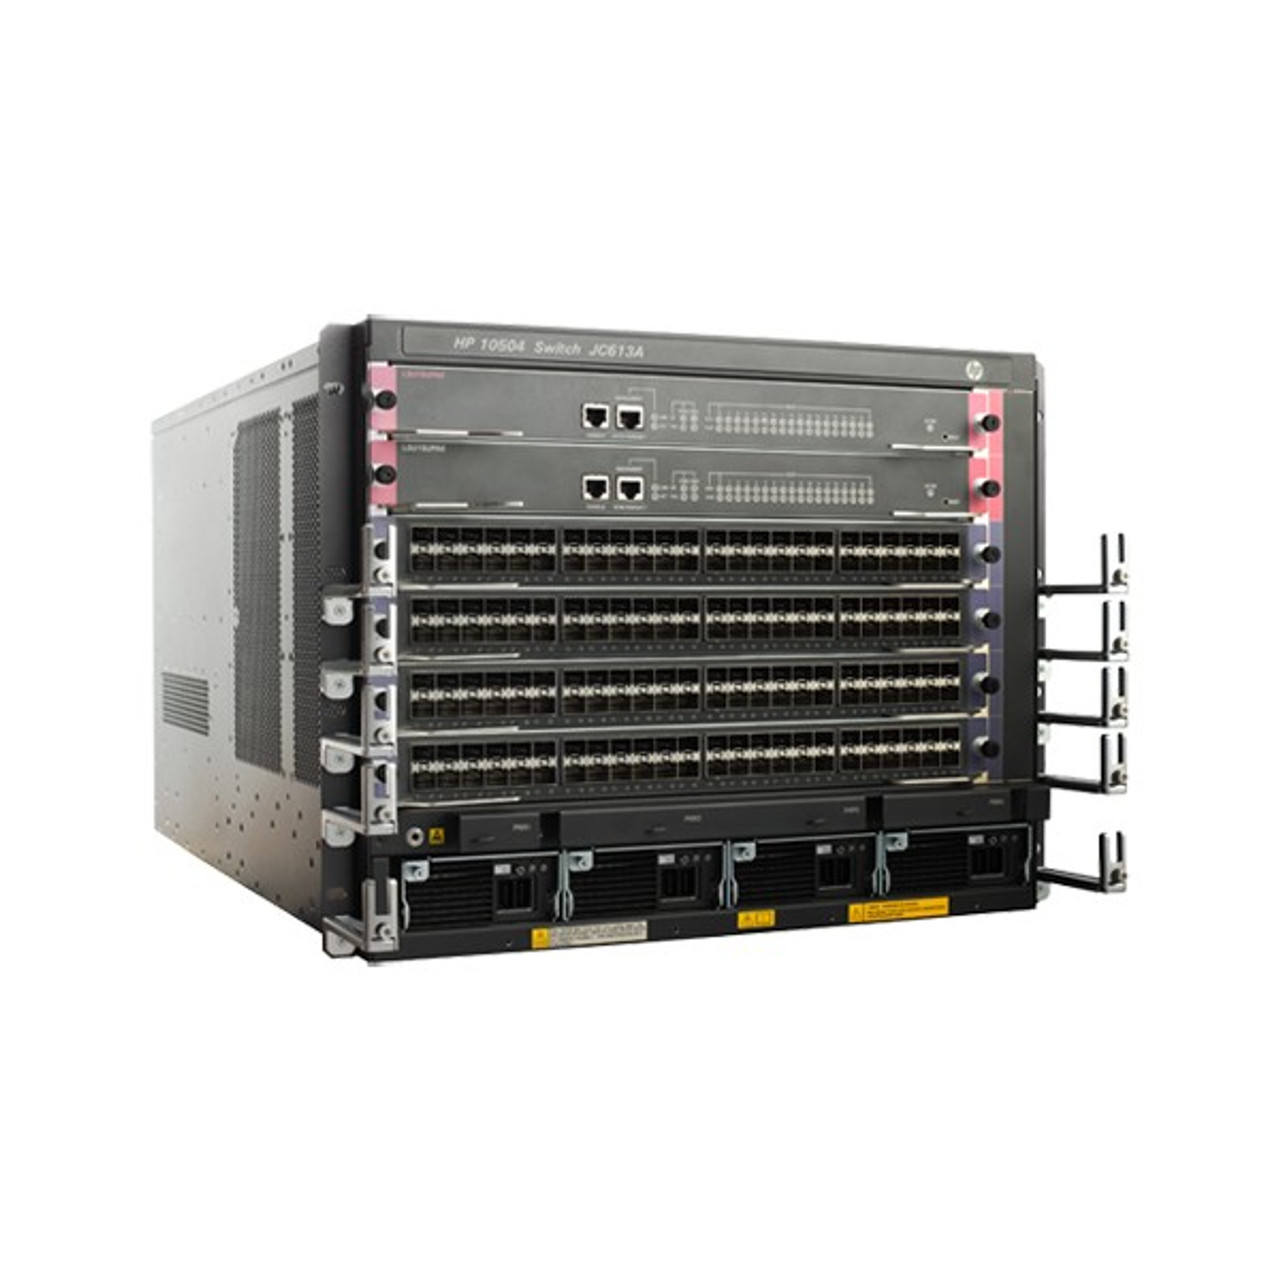 HP 10504 Switch Chassis Switch Rack-mountable